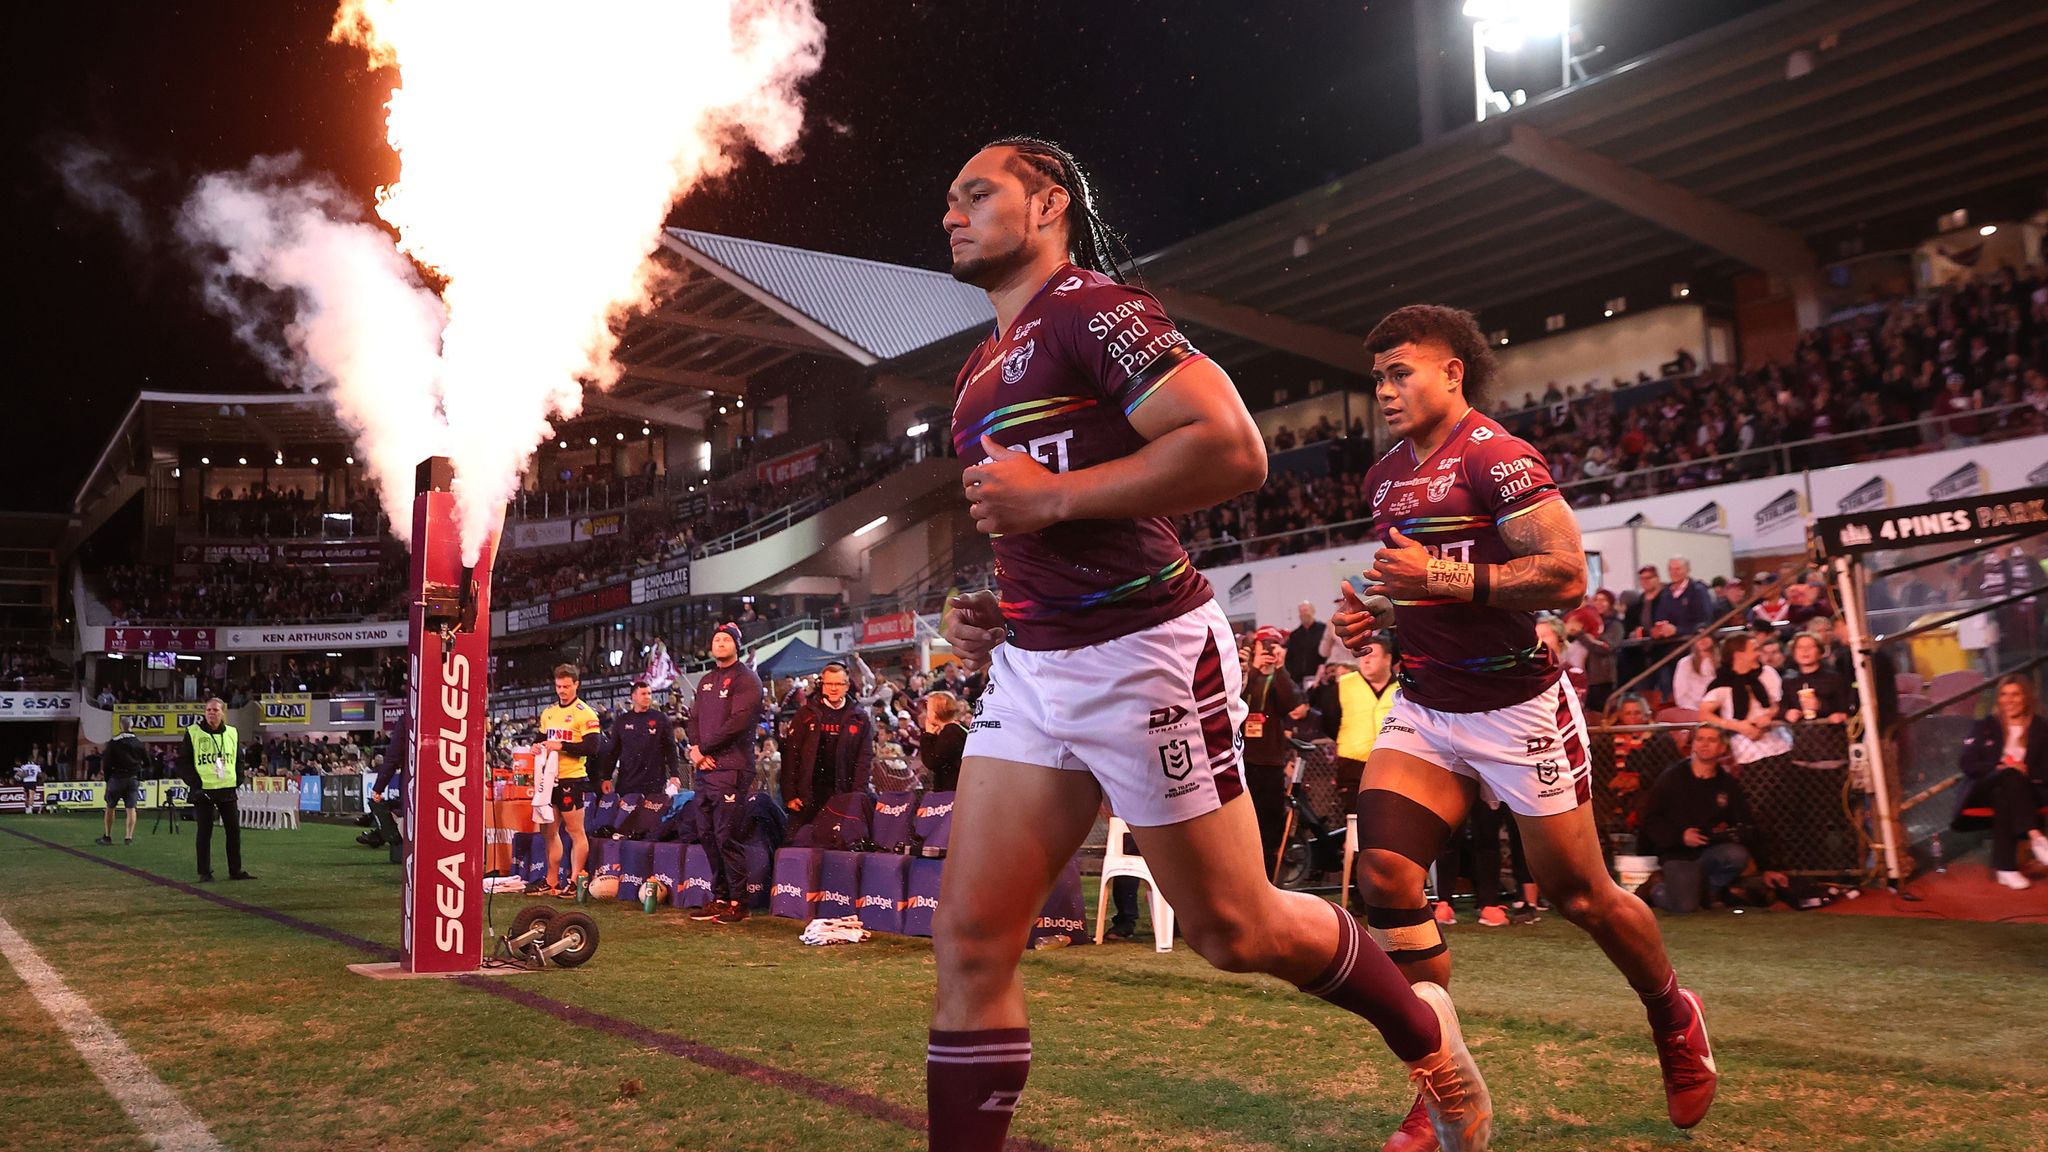 Manly Sea Eagles players open to wearing pride jersey in future after boycott Rugby League News Sky Sports